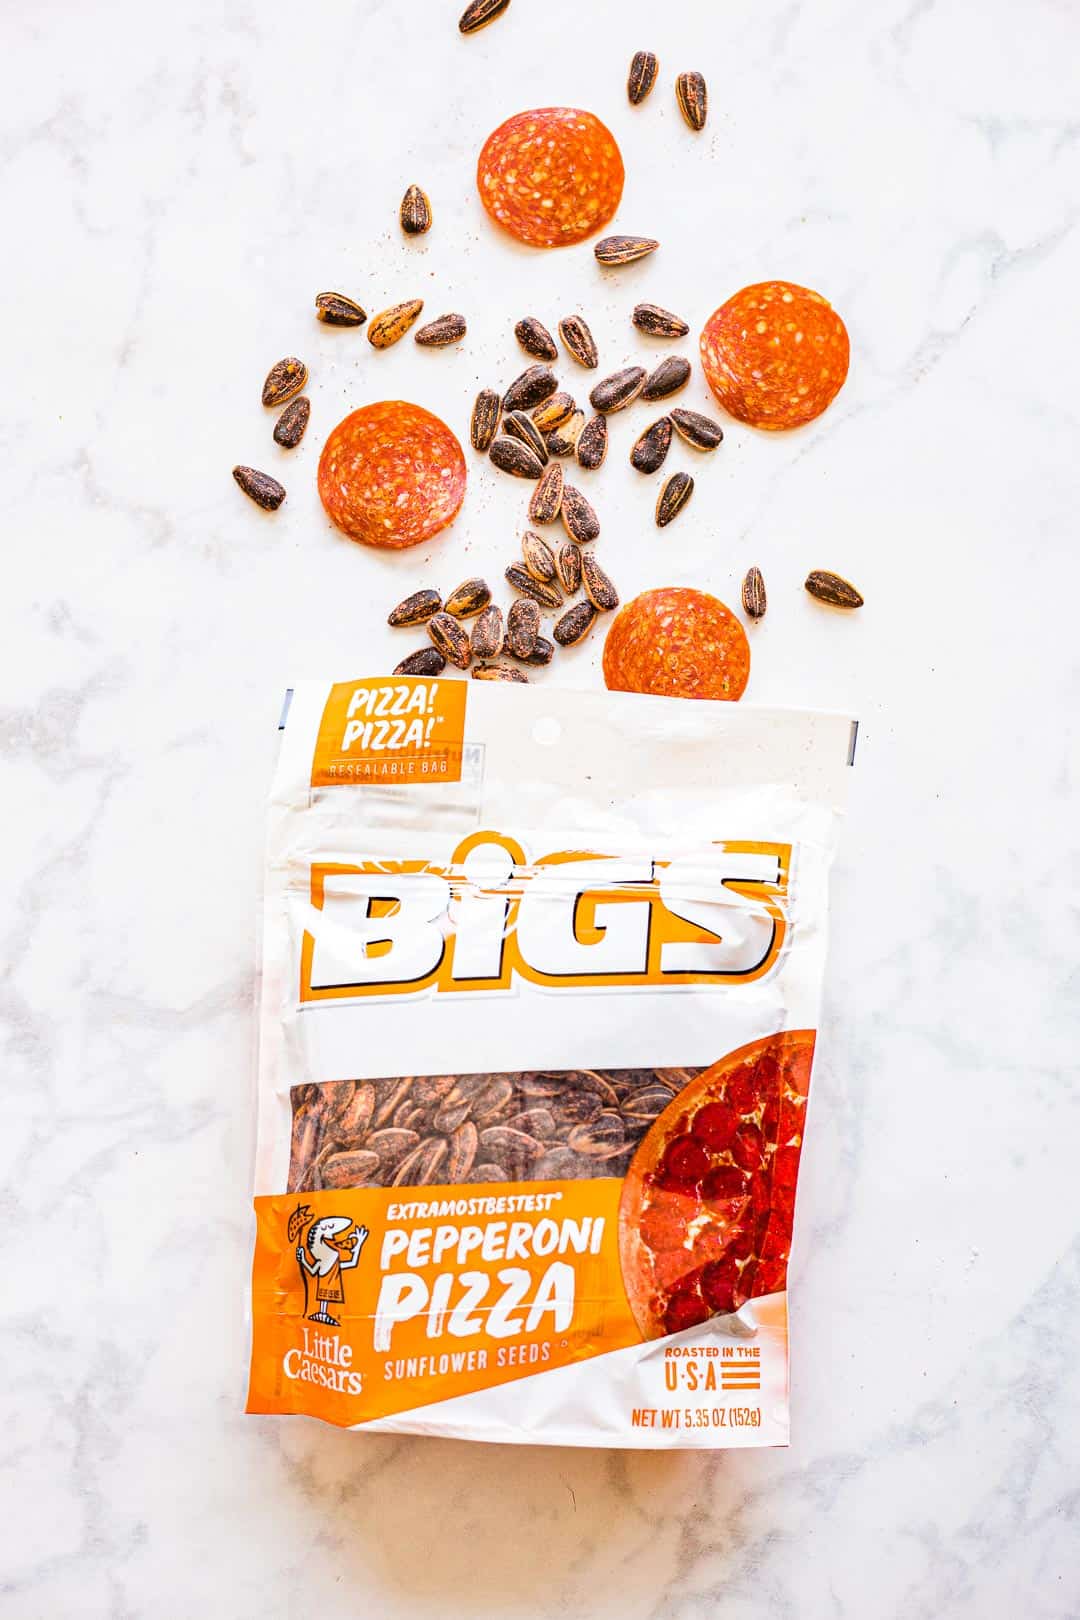 Bigs Pepperoni Pizza Sunflower Seeds in bag next to pepperoni slices